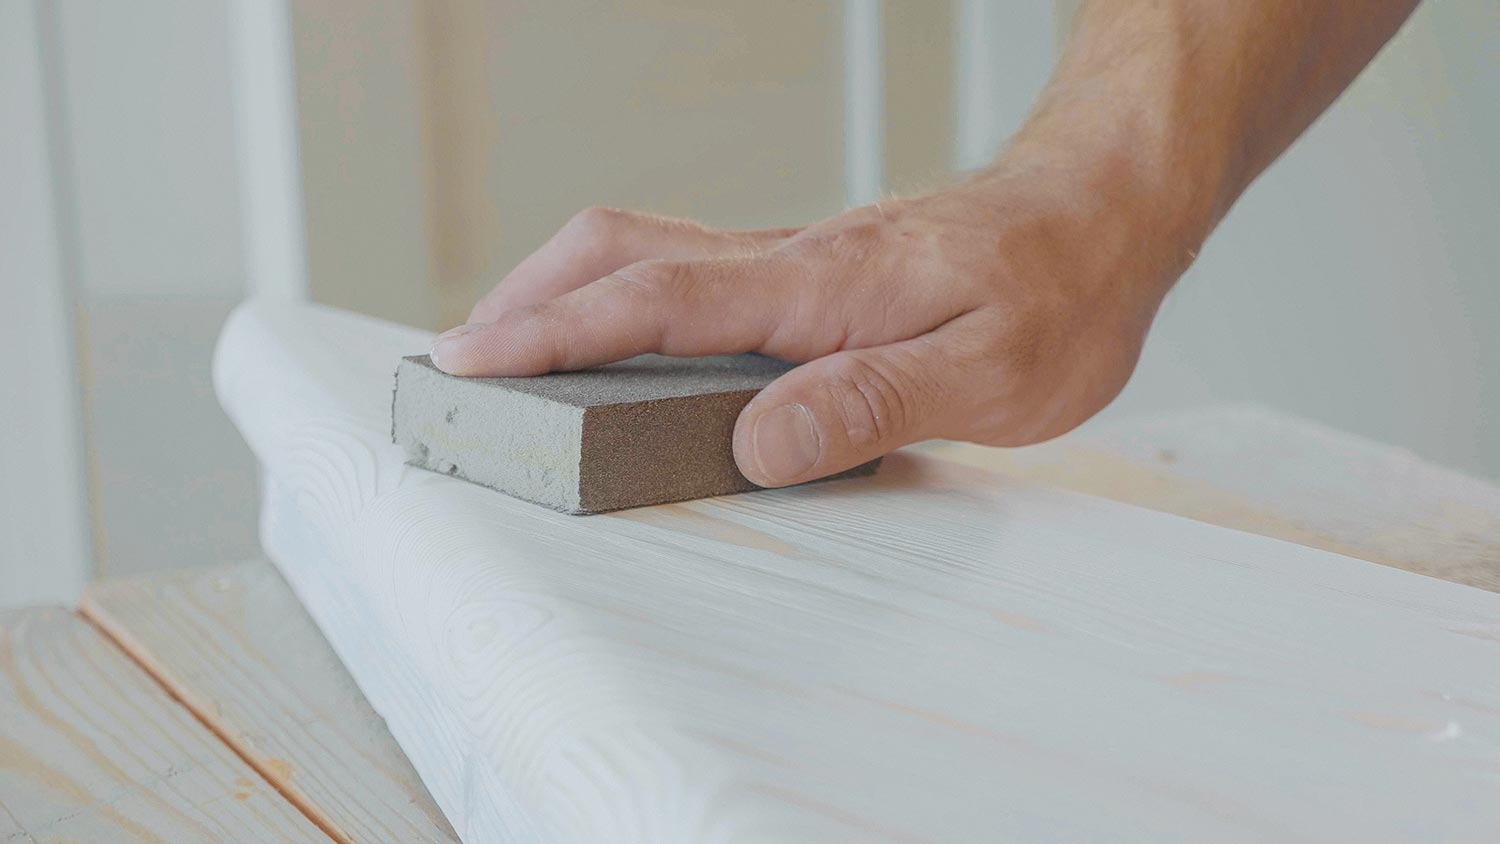 Male hands polishing wooden step with sandpaper